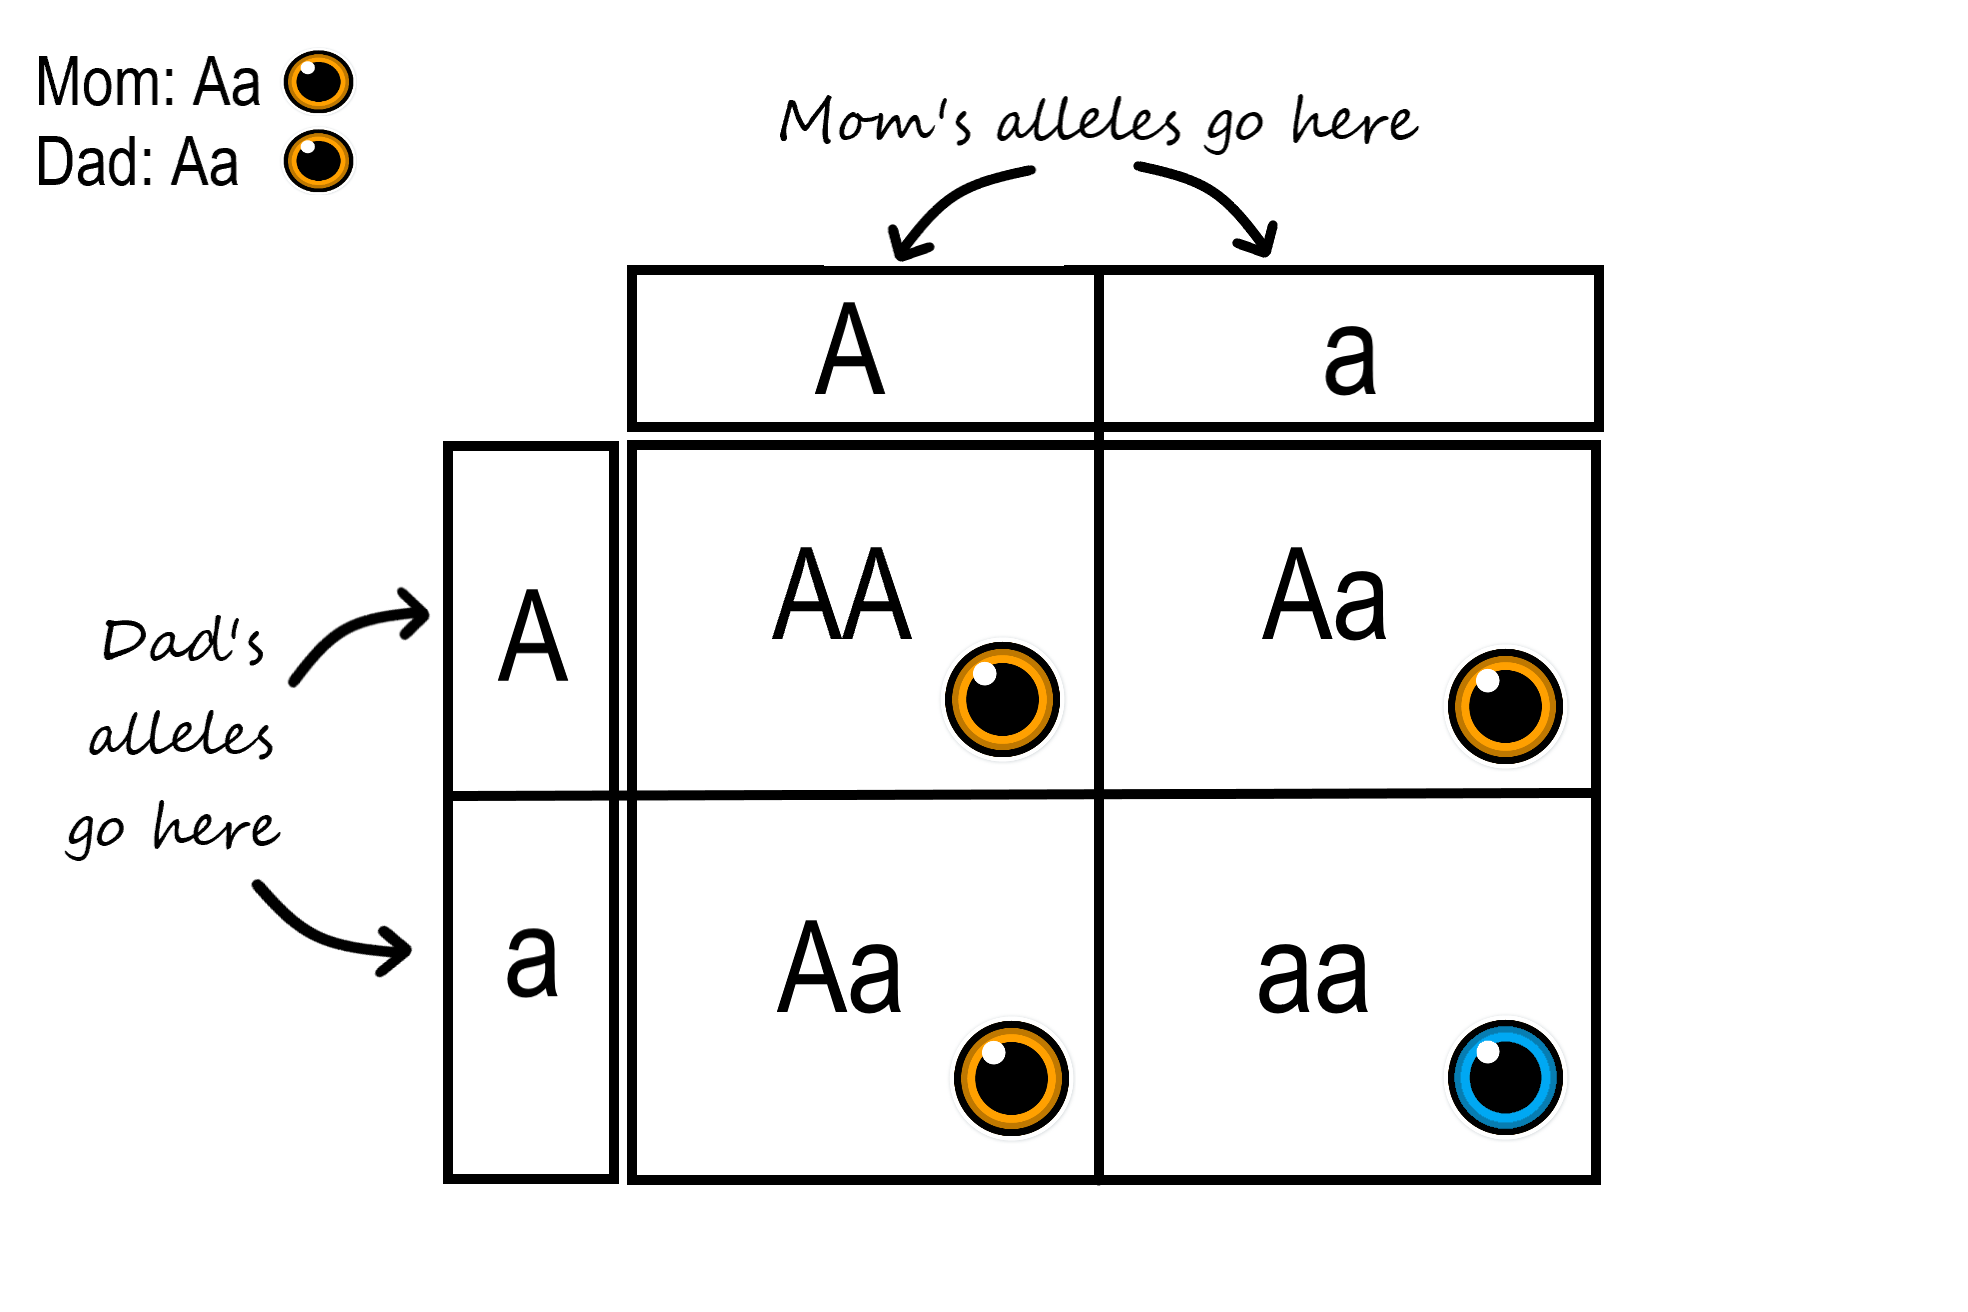 Image shows a sample of a Punnett Square